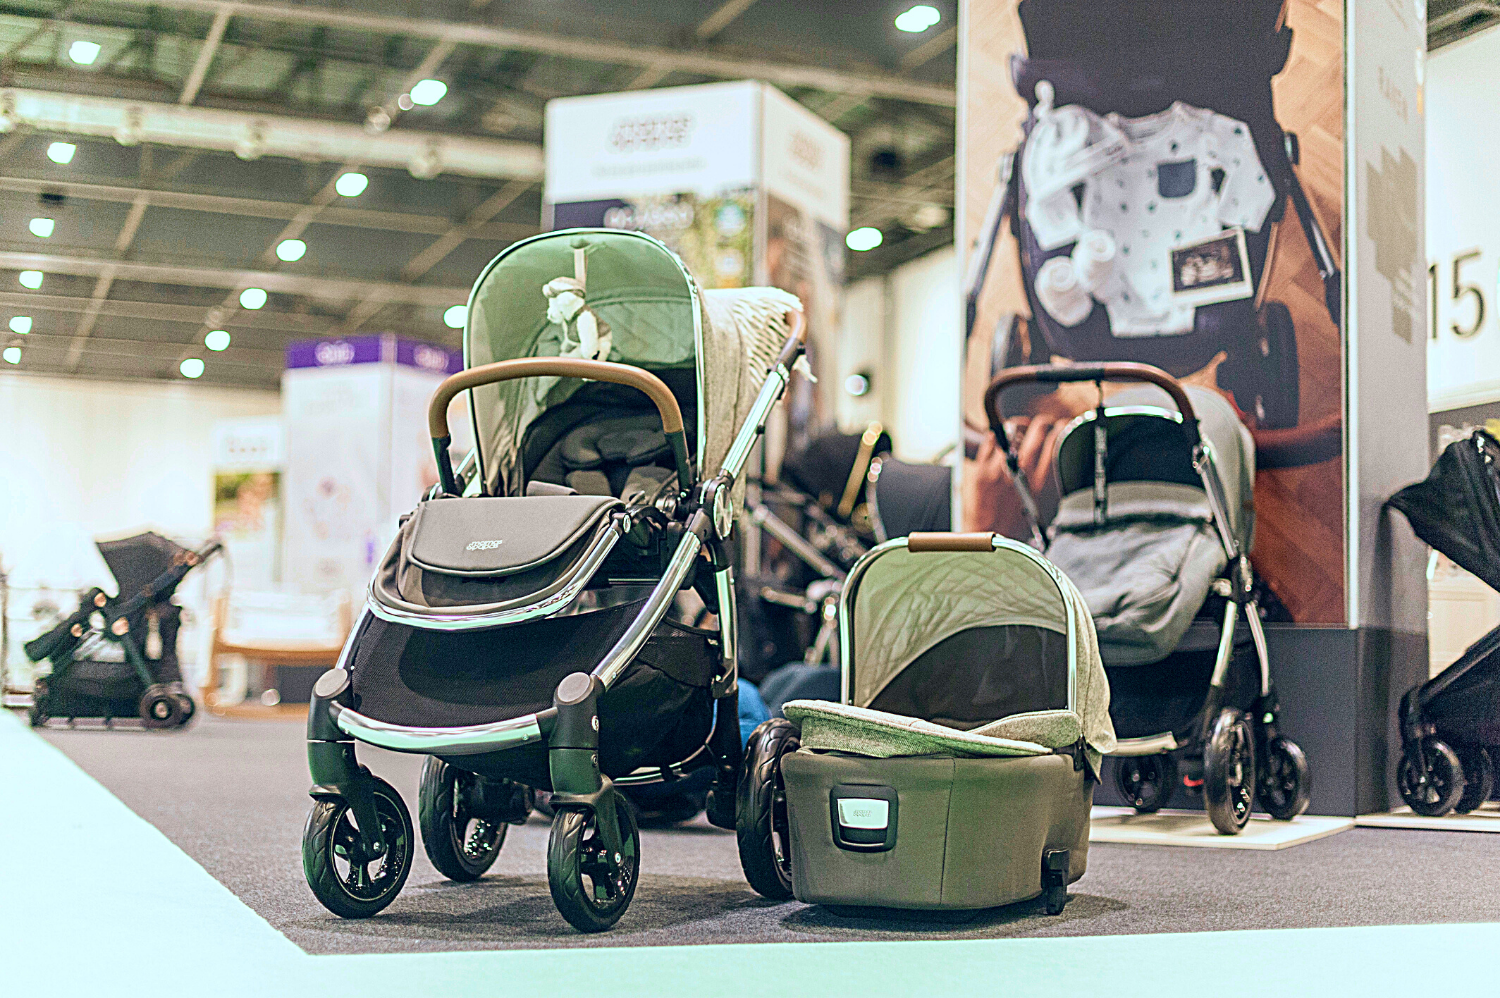 Compare buggies & strollers